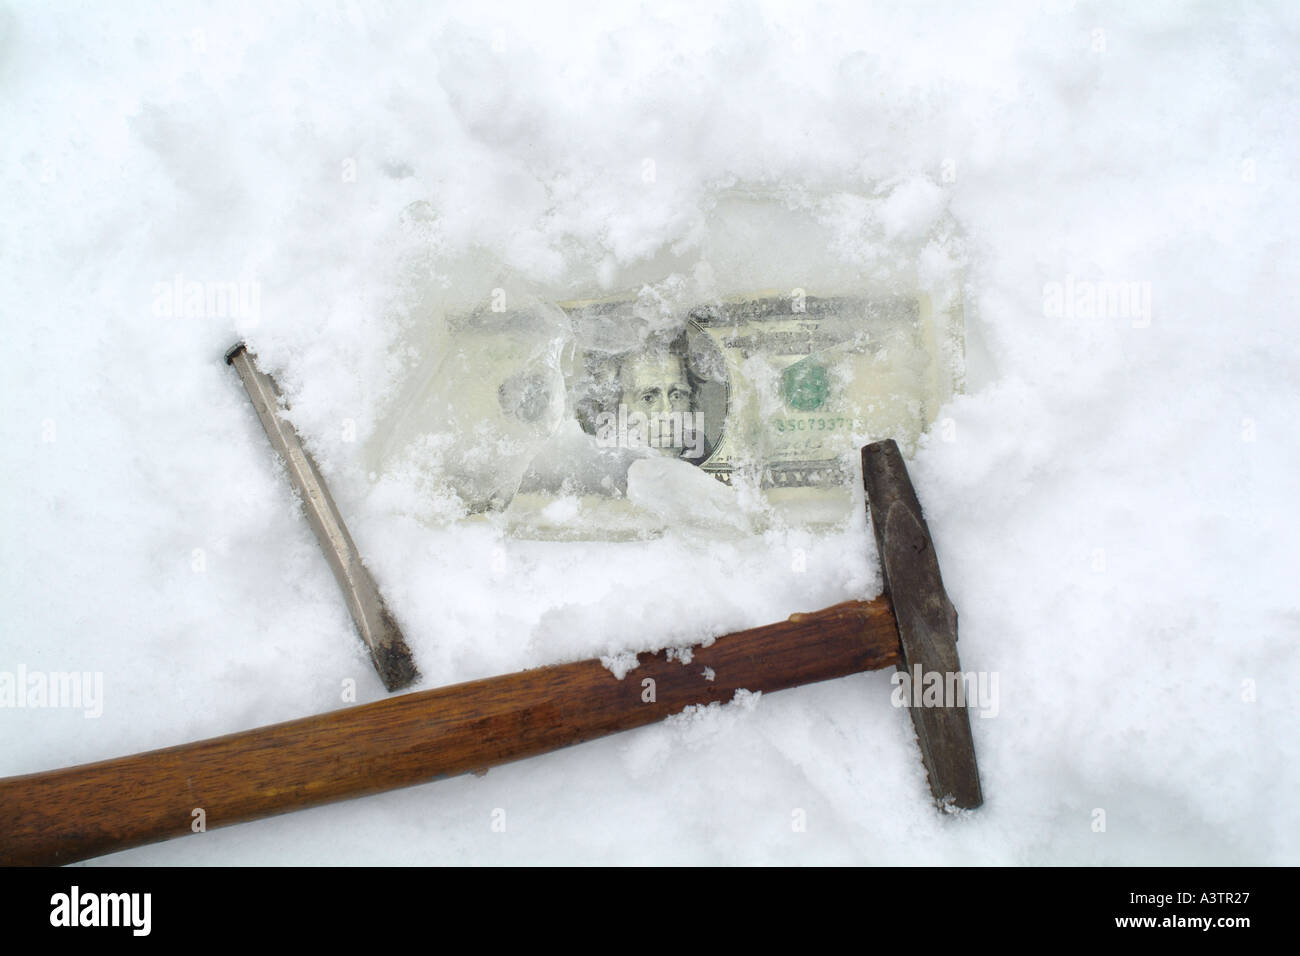 Frozen money with hammer and chisel Stock Photo